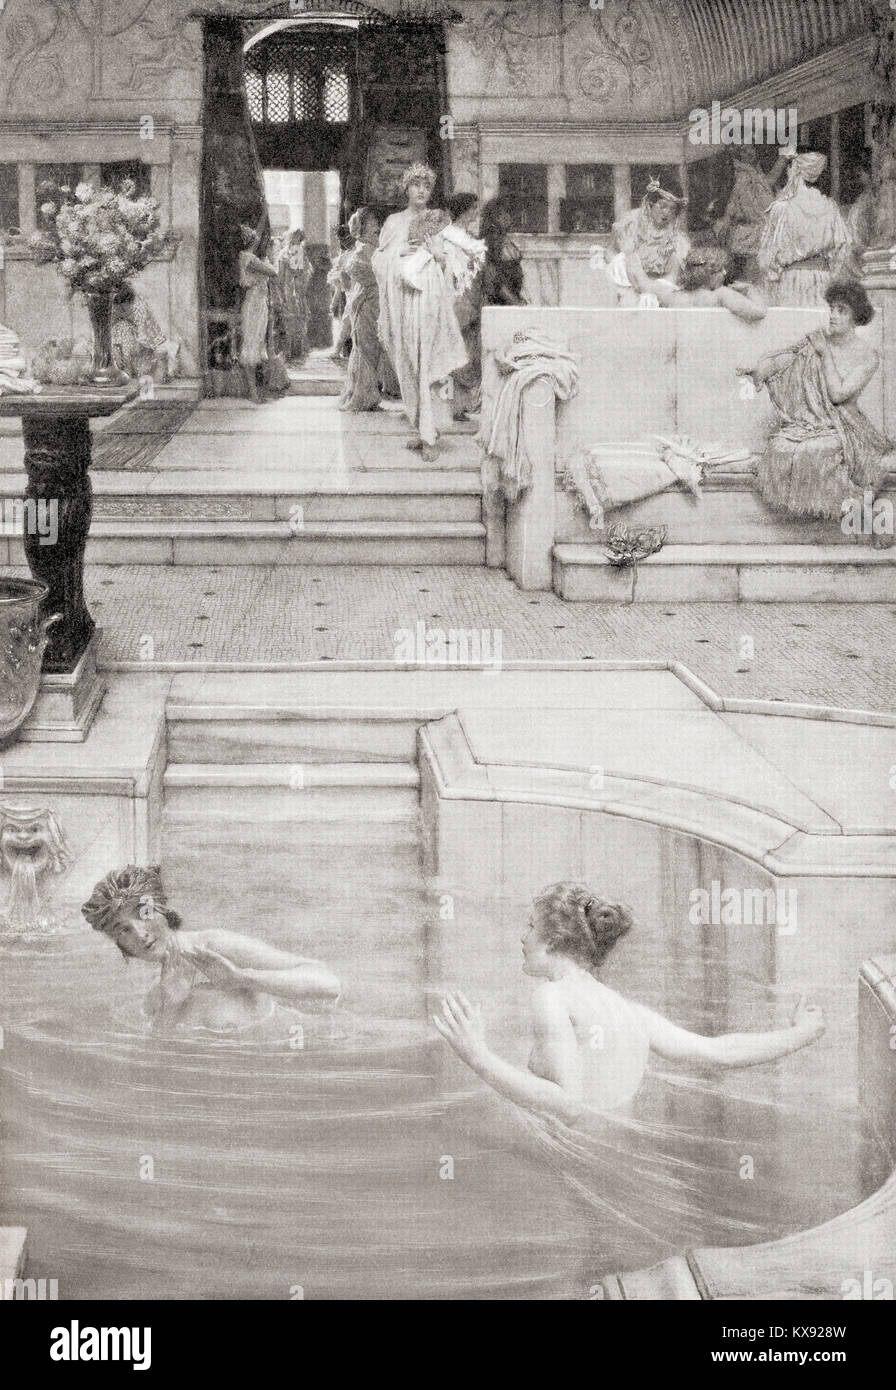 Ladies bathing in the public baths in ancient Rome.  From Hutchinson's History of the Nations, published 1915. Stock Photo